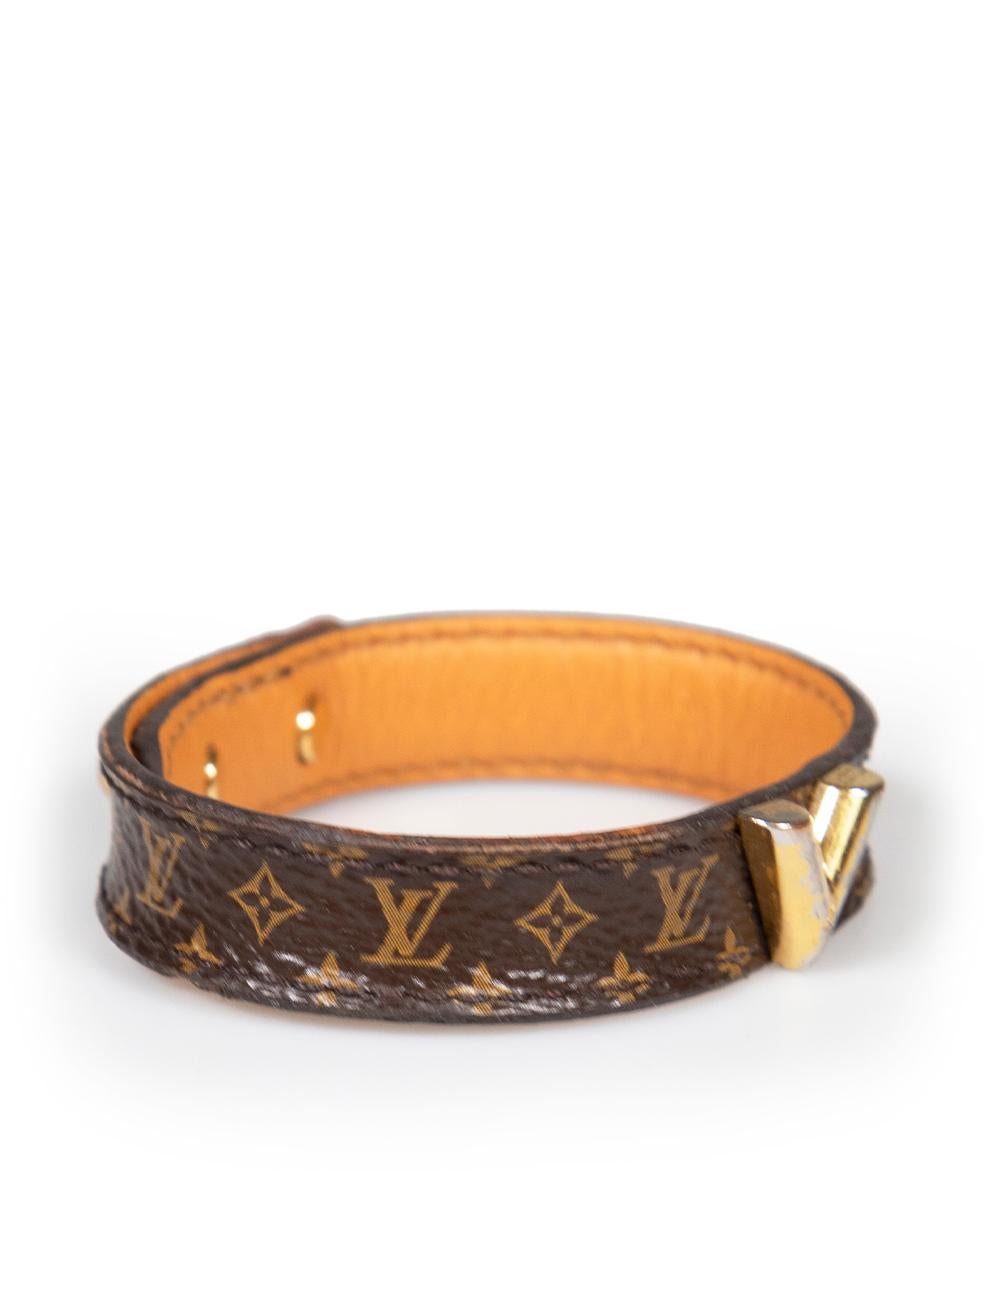 CONDITION is Very good. Minimal wear to bracelet is evident. Minimal wear with general creasing and abrasions to edge and inside leather. There is some slight tarnishing to the metal logo on this used Louis Vuitton designer resale item.
 
 
 
